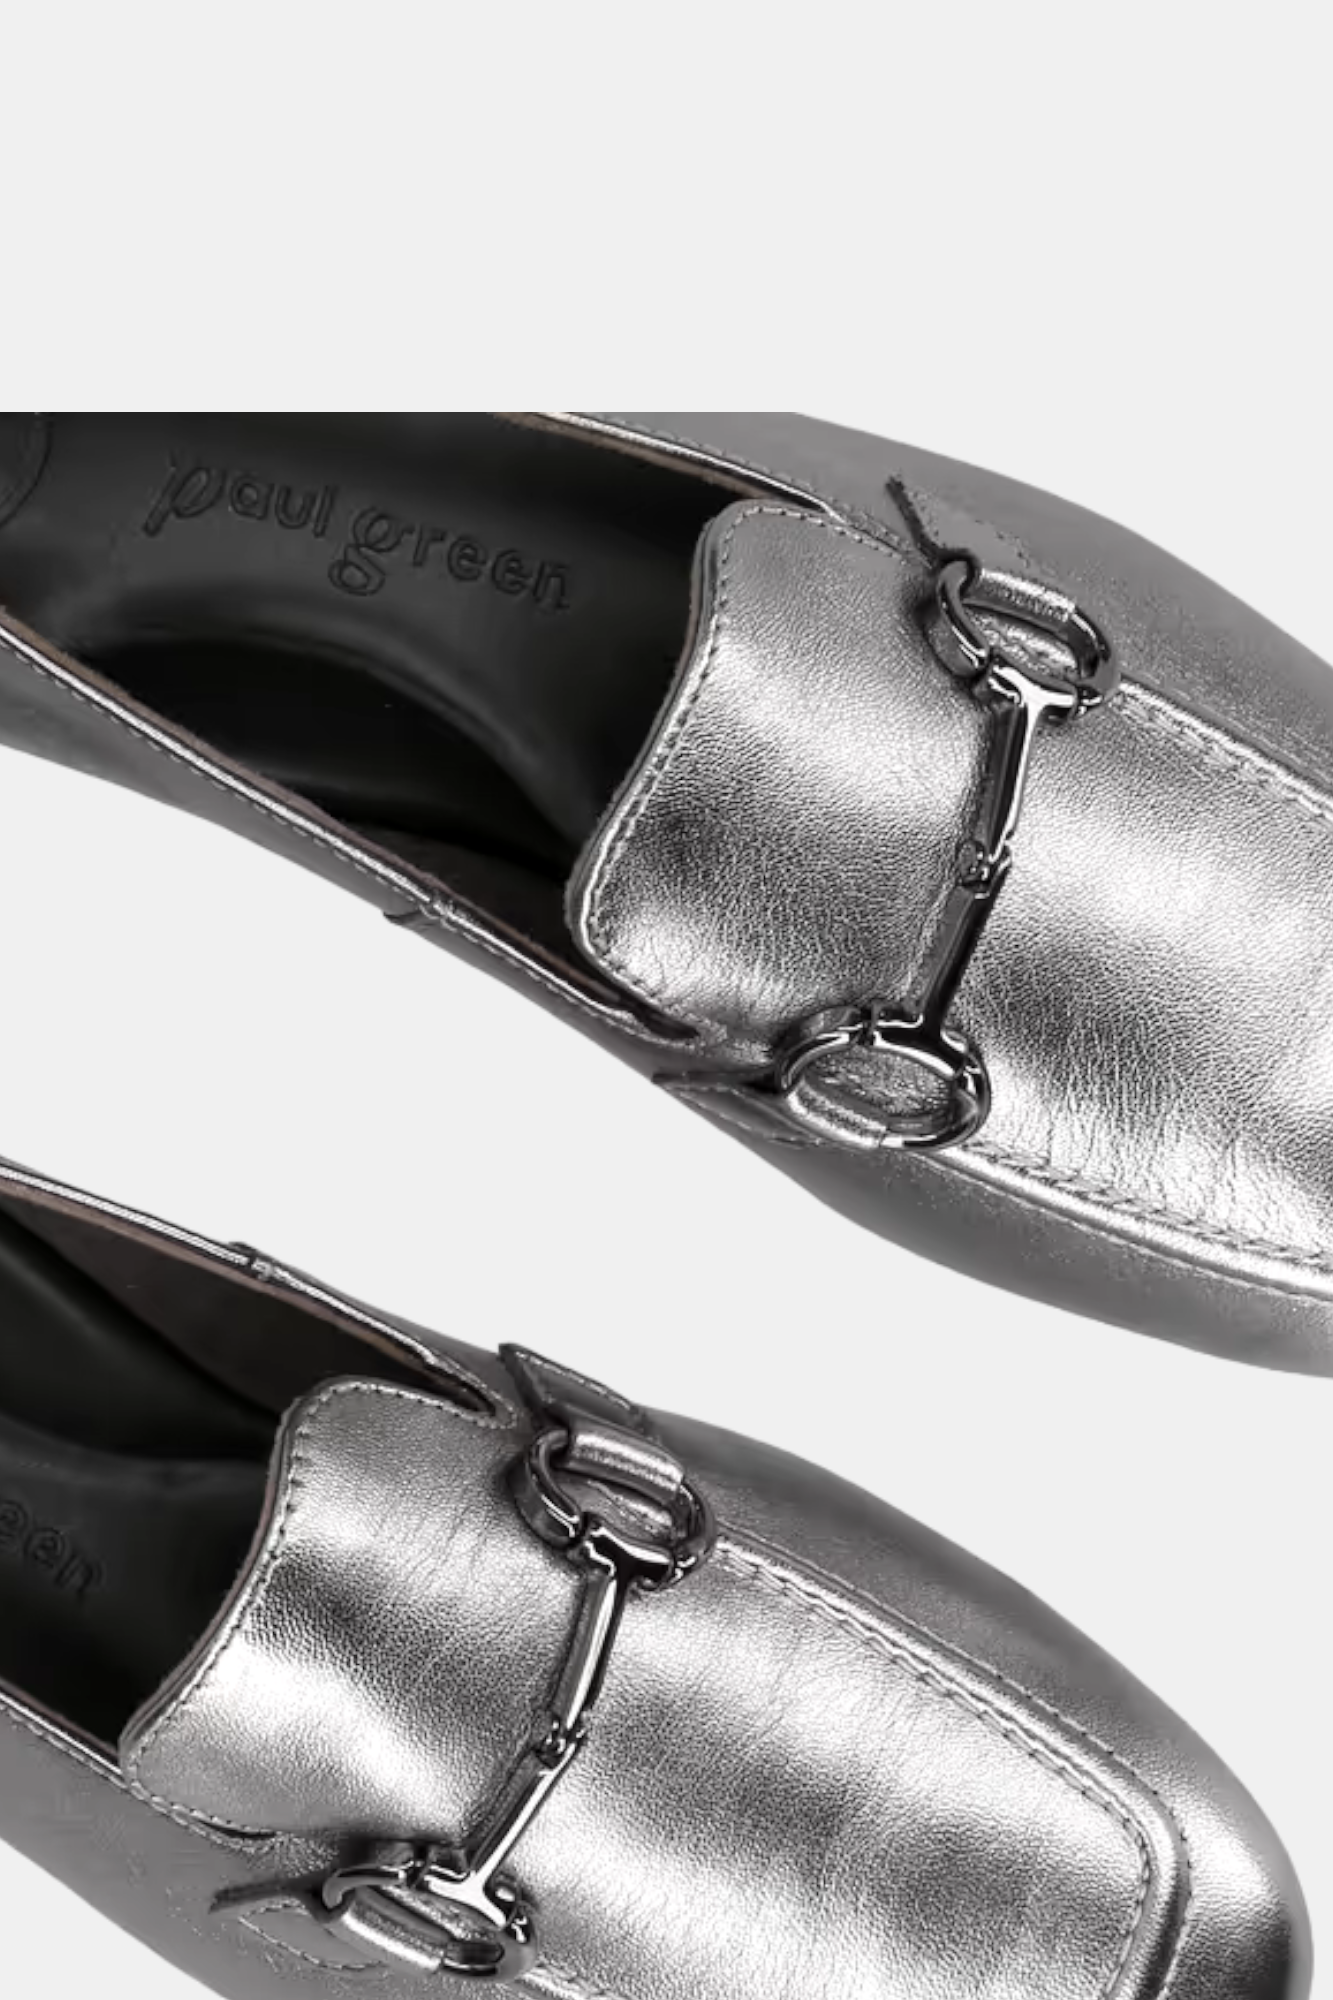 PAUL GREEN 2596 PEWTER LEATHER LOAFERS